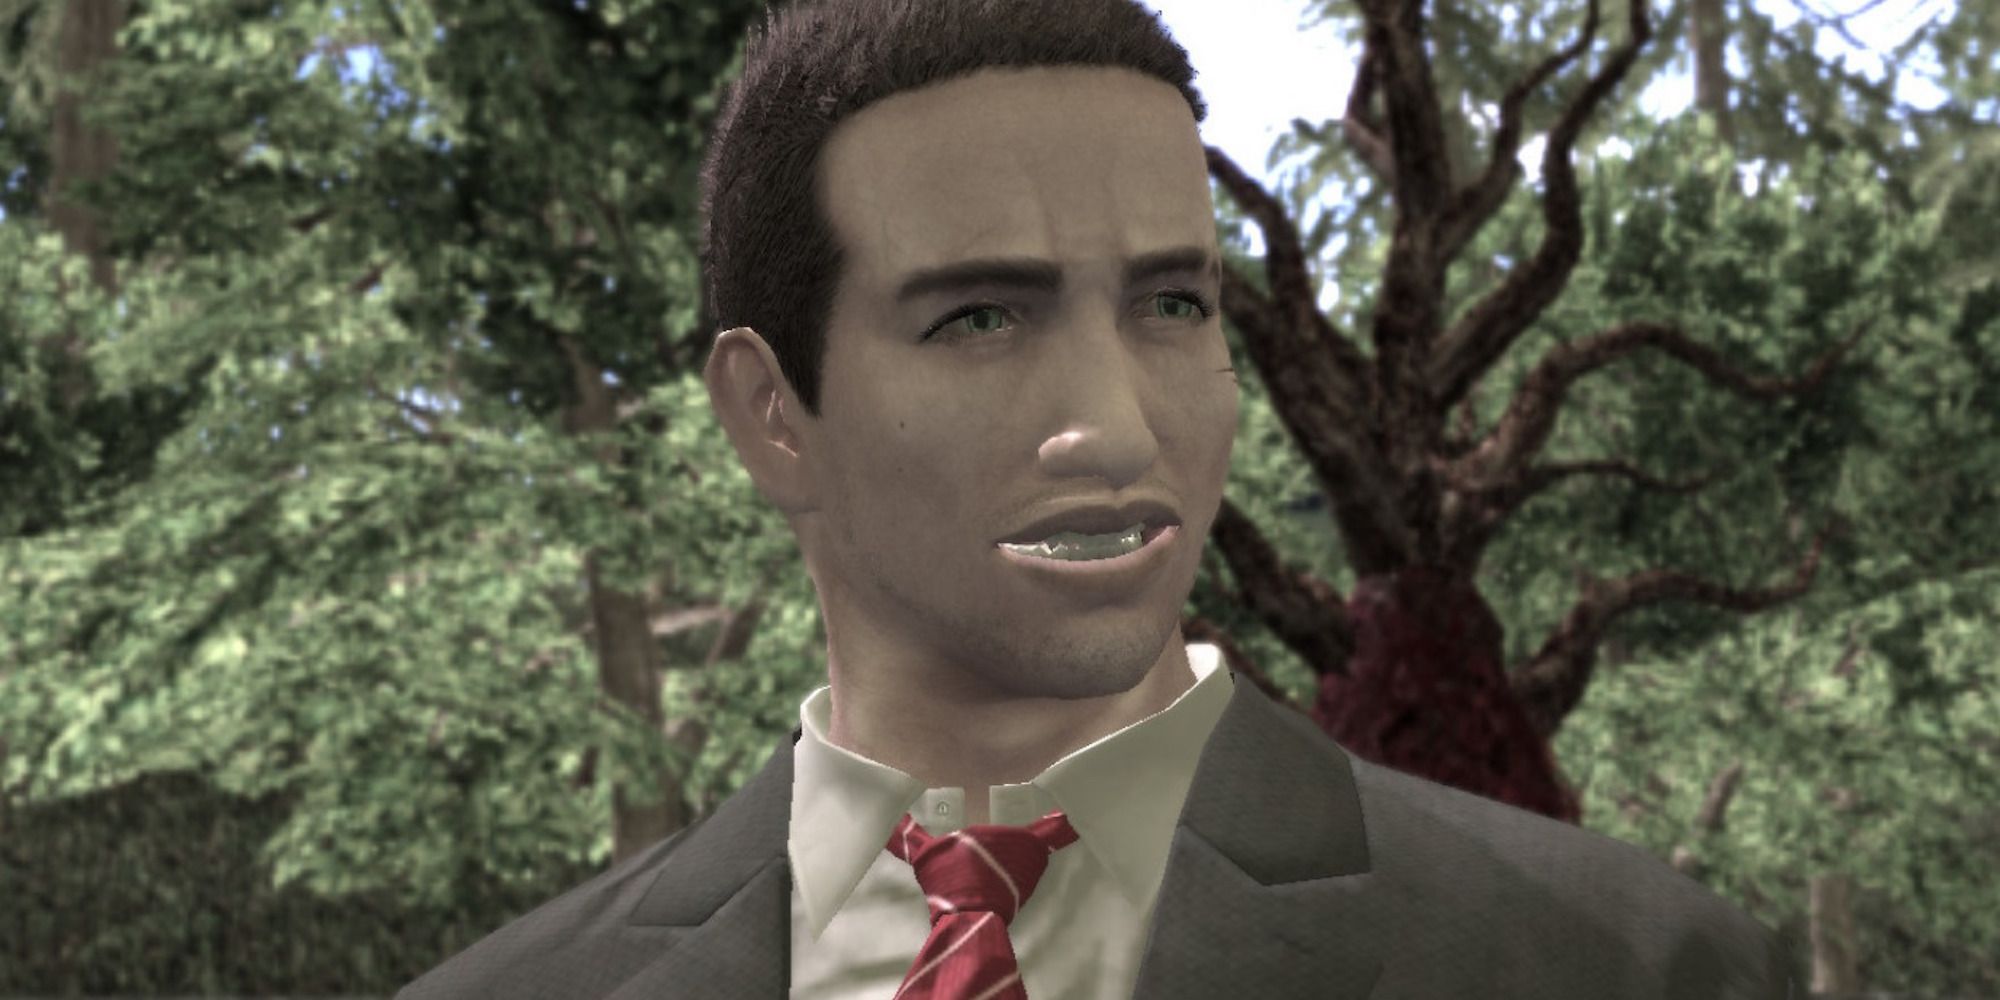 Agent Morgan from Deadly Premonition